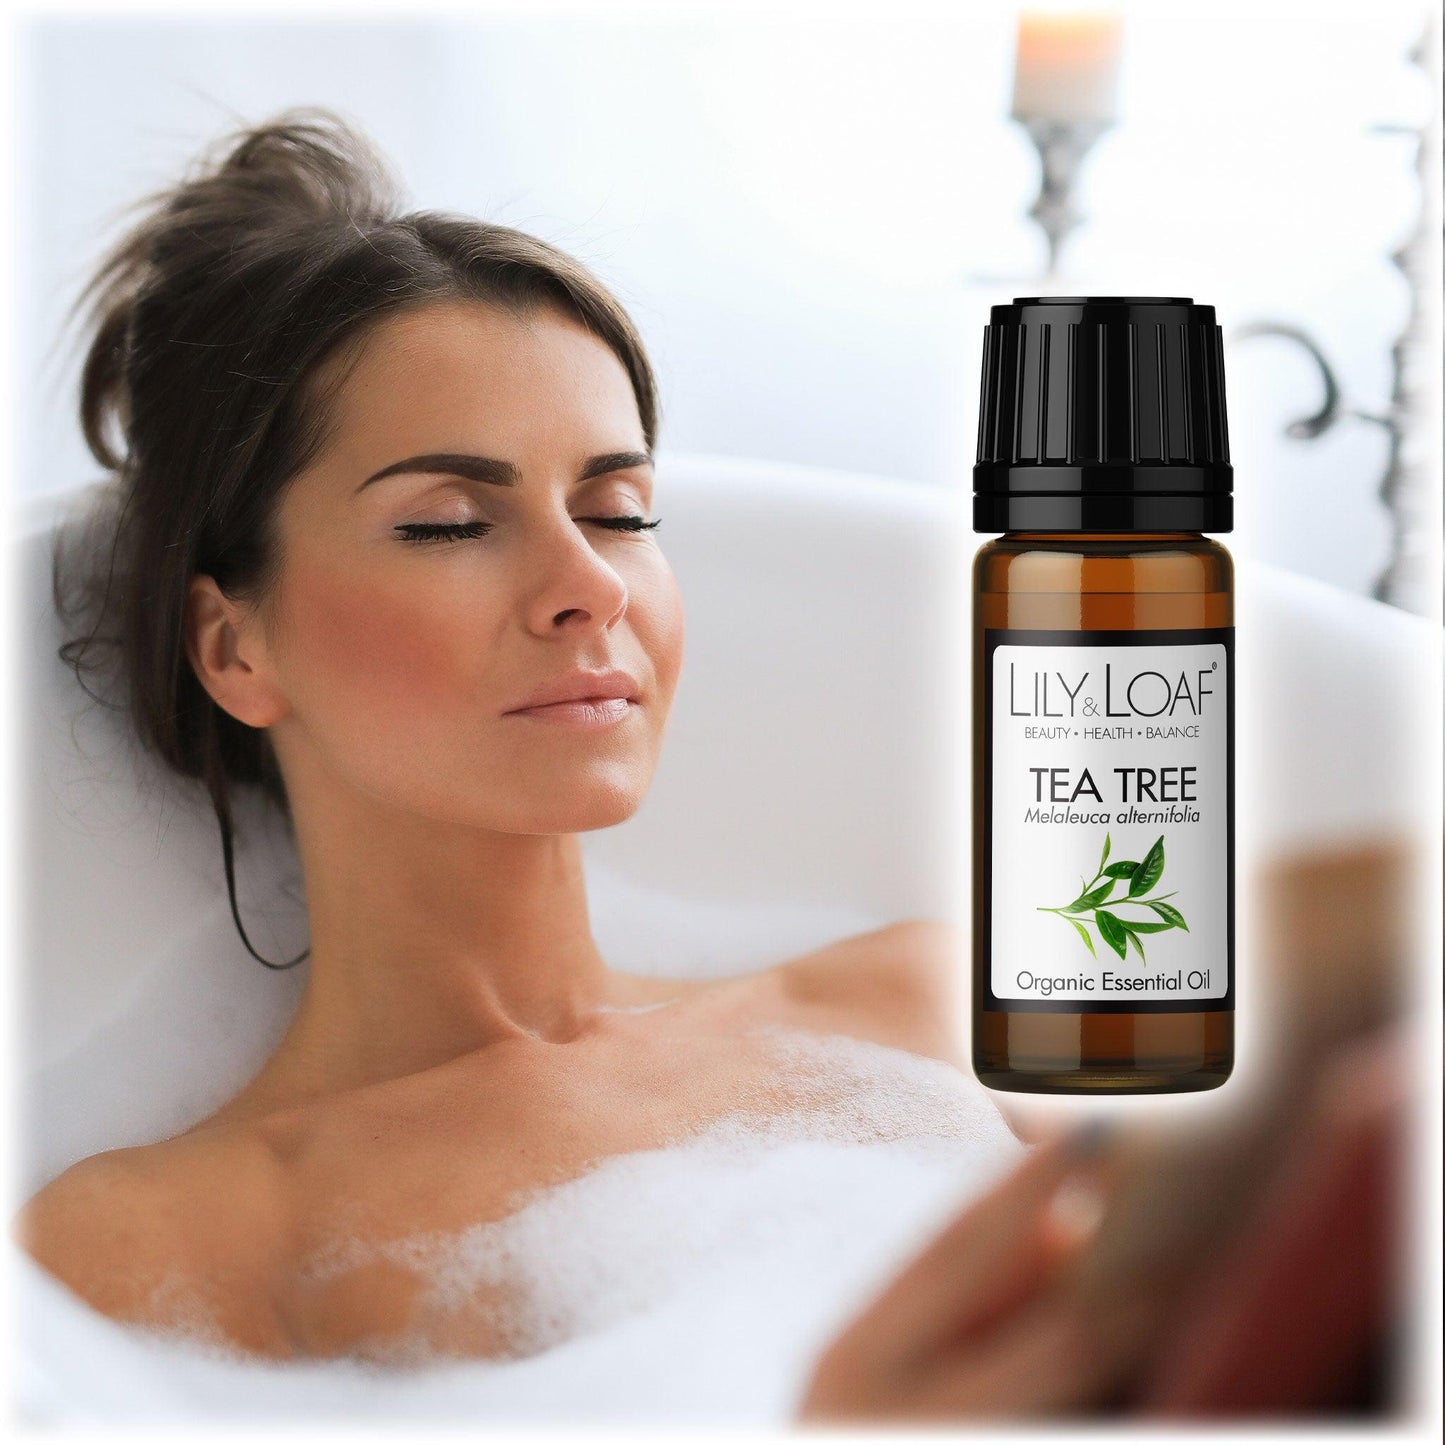 Woman relaxing in a bubble bath with eyes closed, alongside Lily & Loaf Tea Tree Organic Essential Oil bottle. Promotes antibacterial and cleansing benefits.